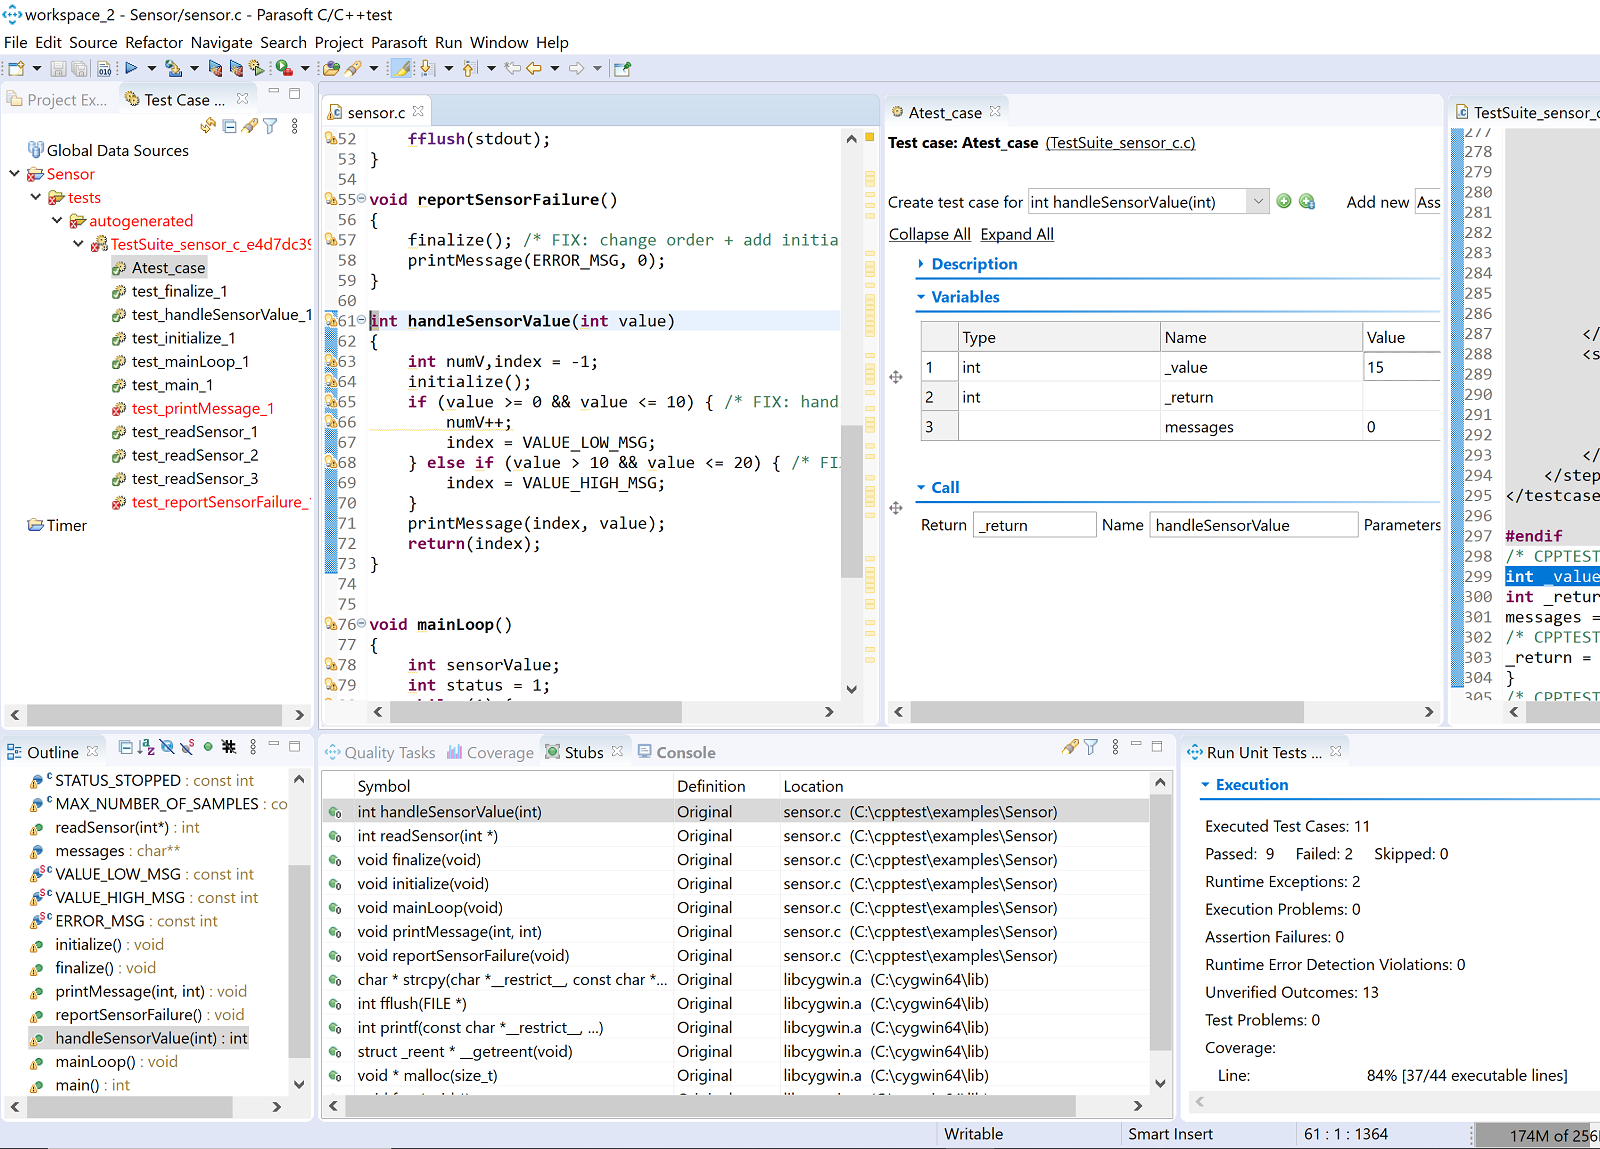 Screenshot of C/C++test with various unit testing window perspectives.